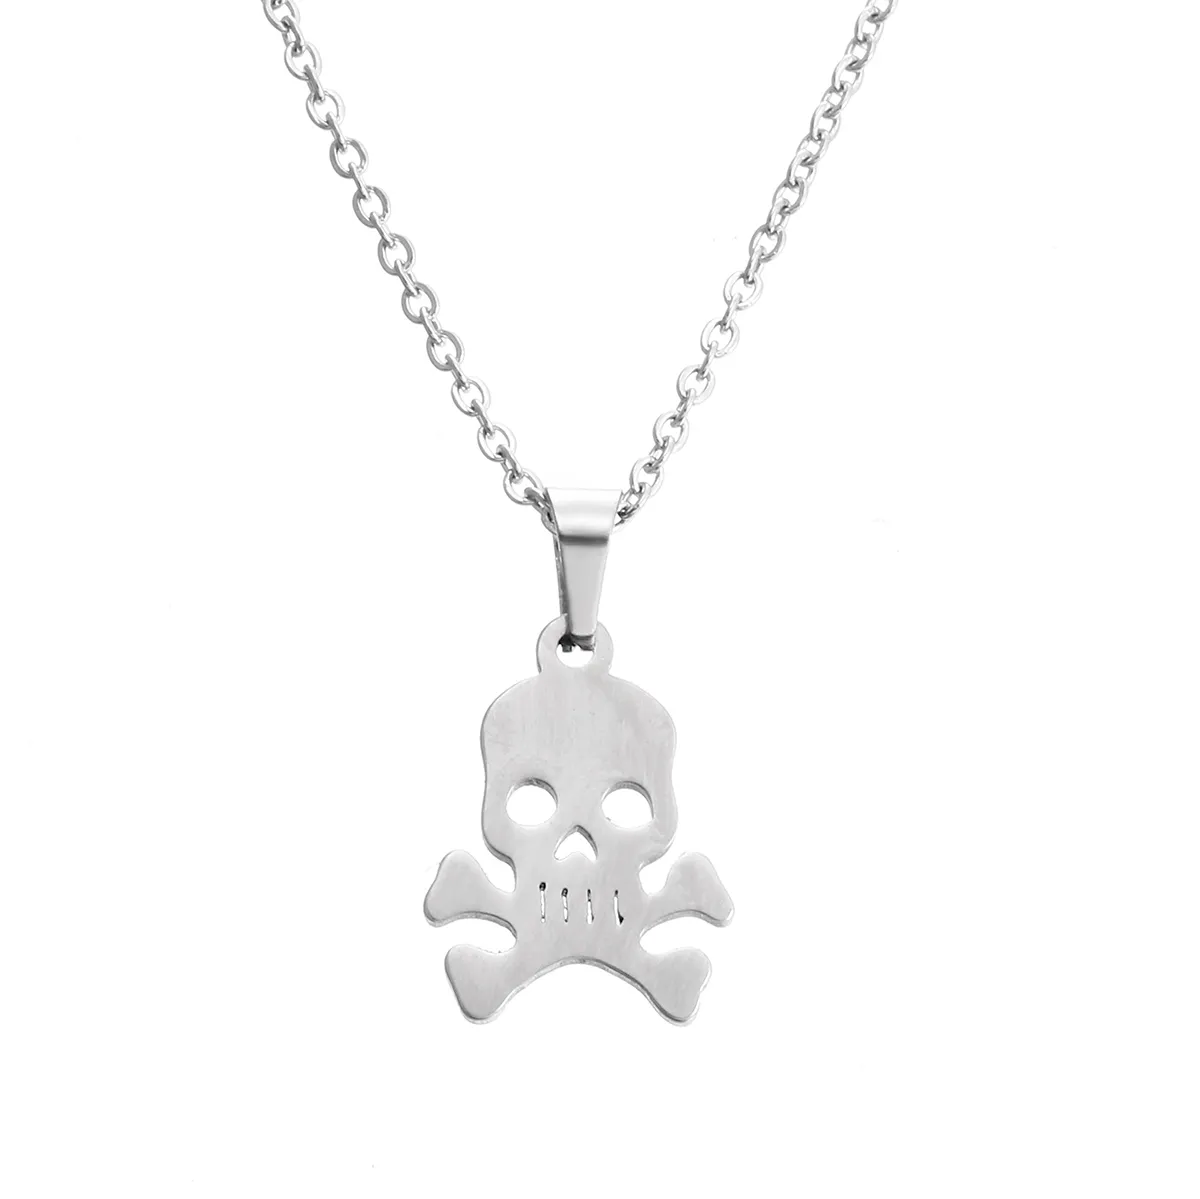 EVERFAST Cute Skull Pendant O Chain Chokers Necklaces Stainless Steel Pirates Necklace For Women Men Punk Style Jewelry SN023